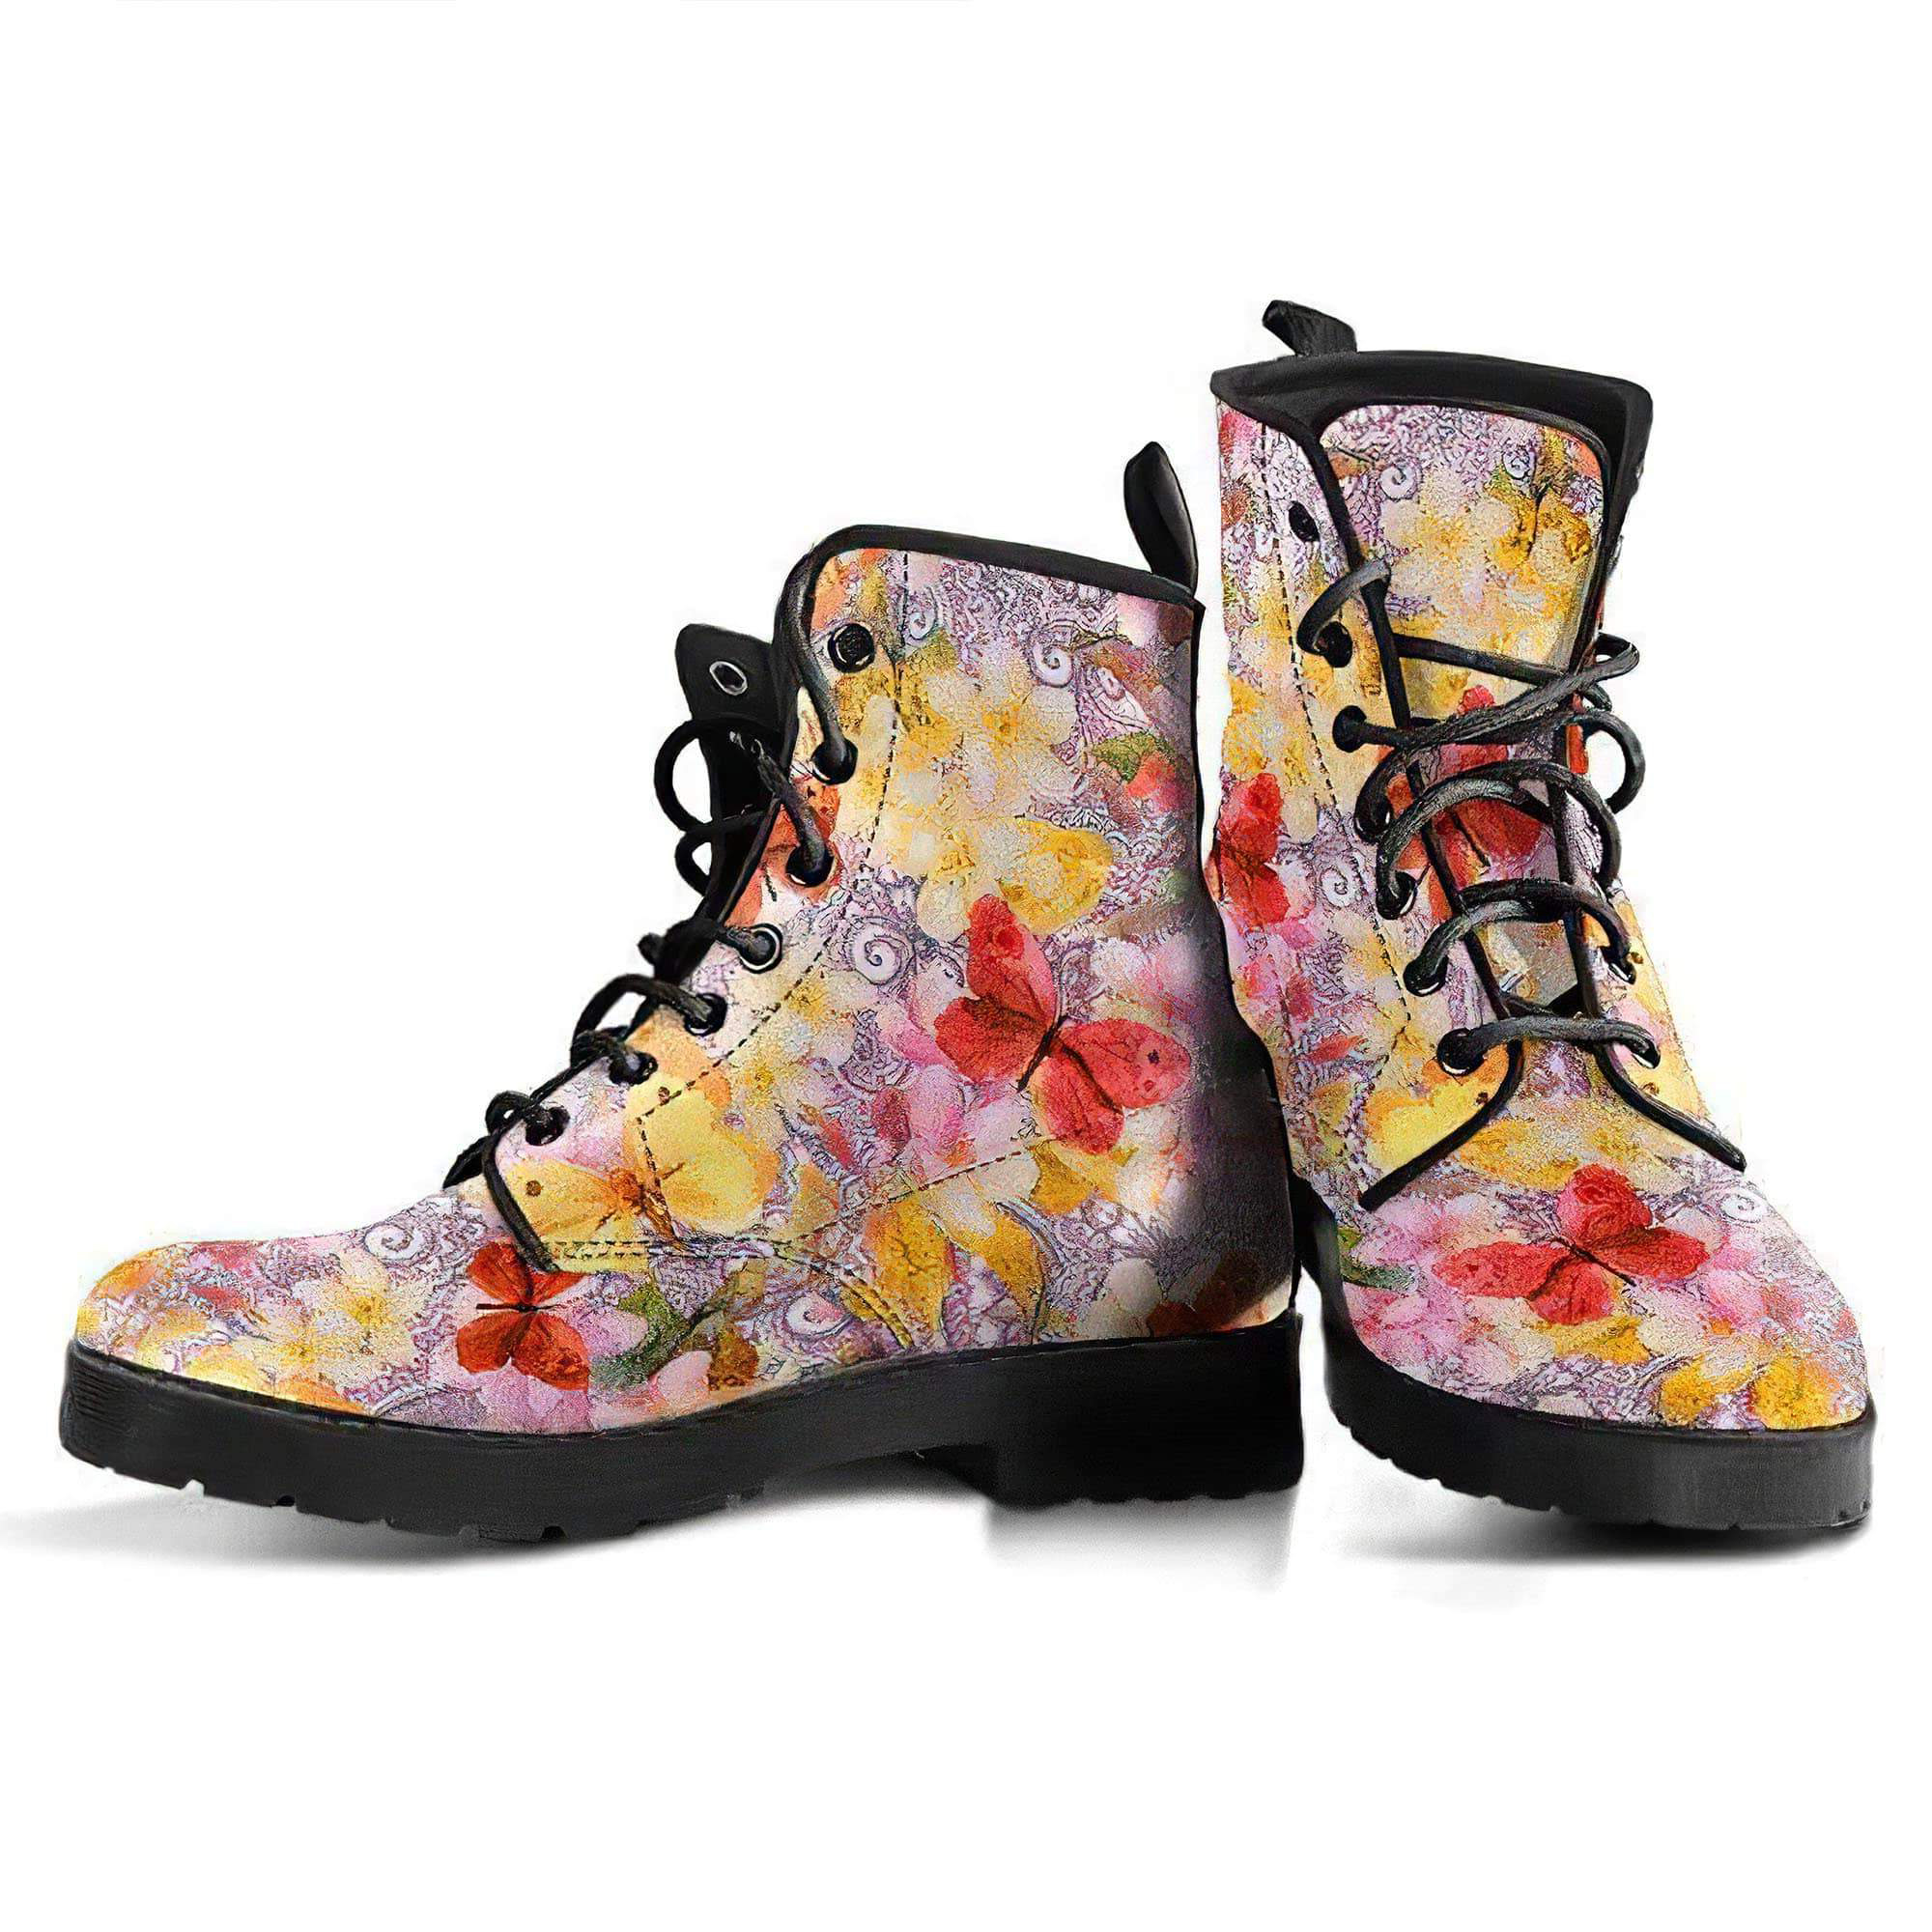 watercolor-butterfly-handcrafted-boots-women-s-leather-boots-12051973636157.jpg